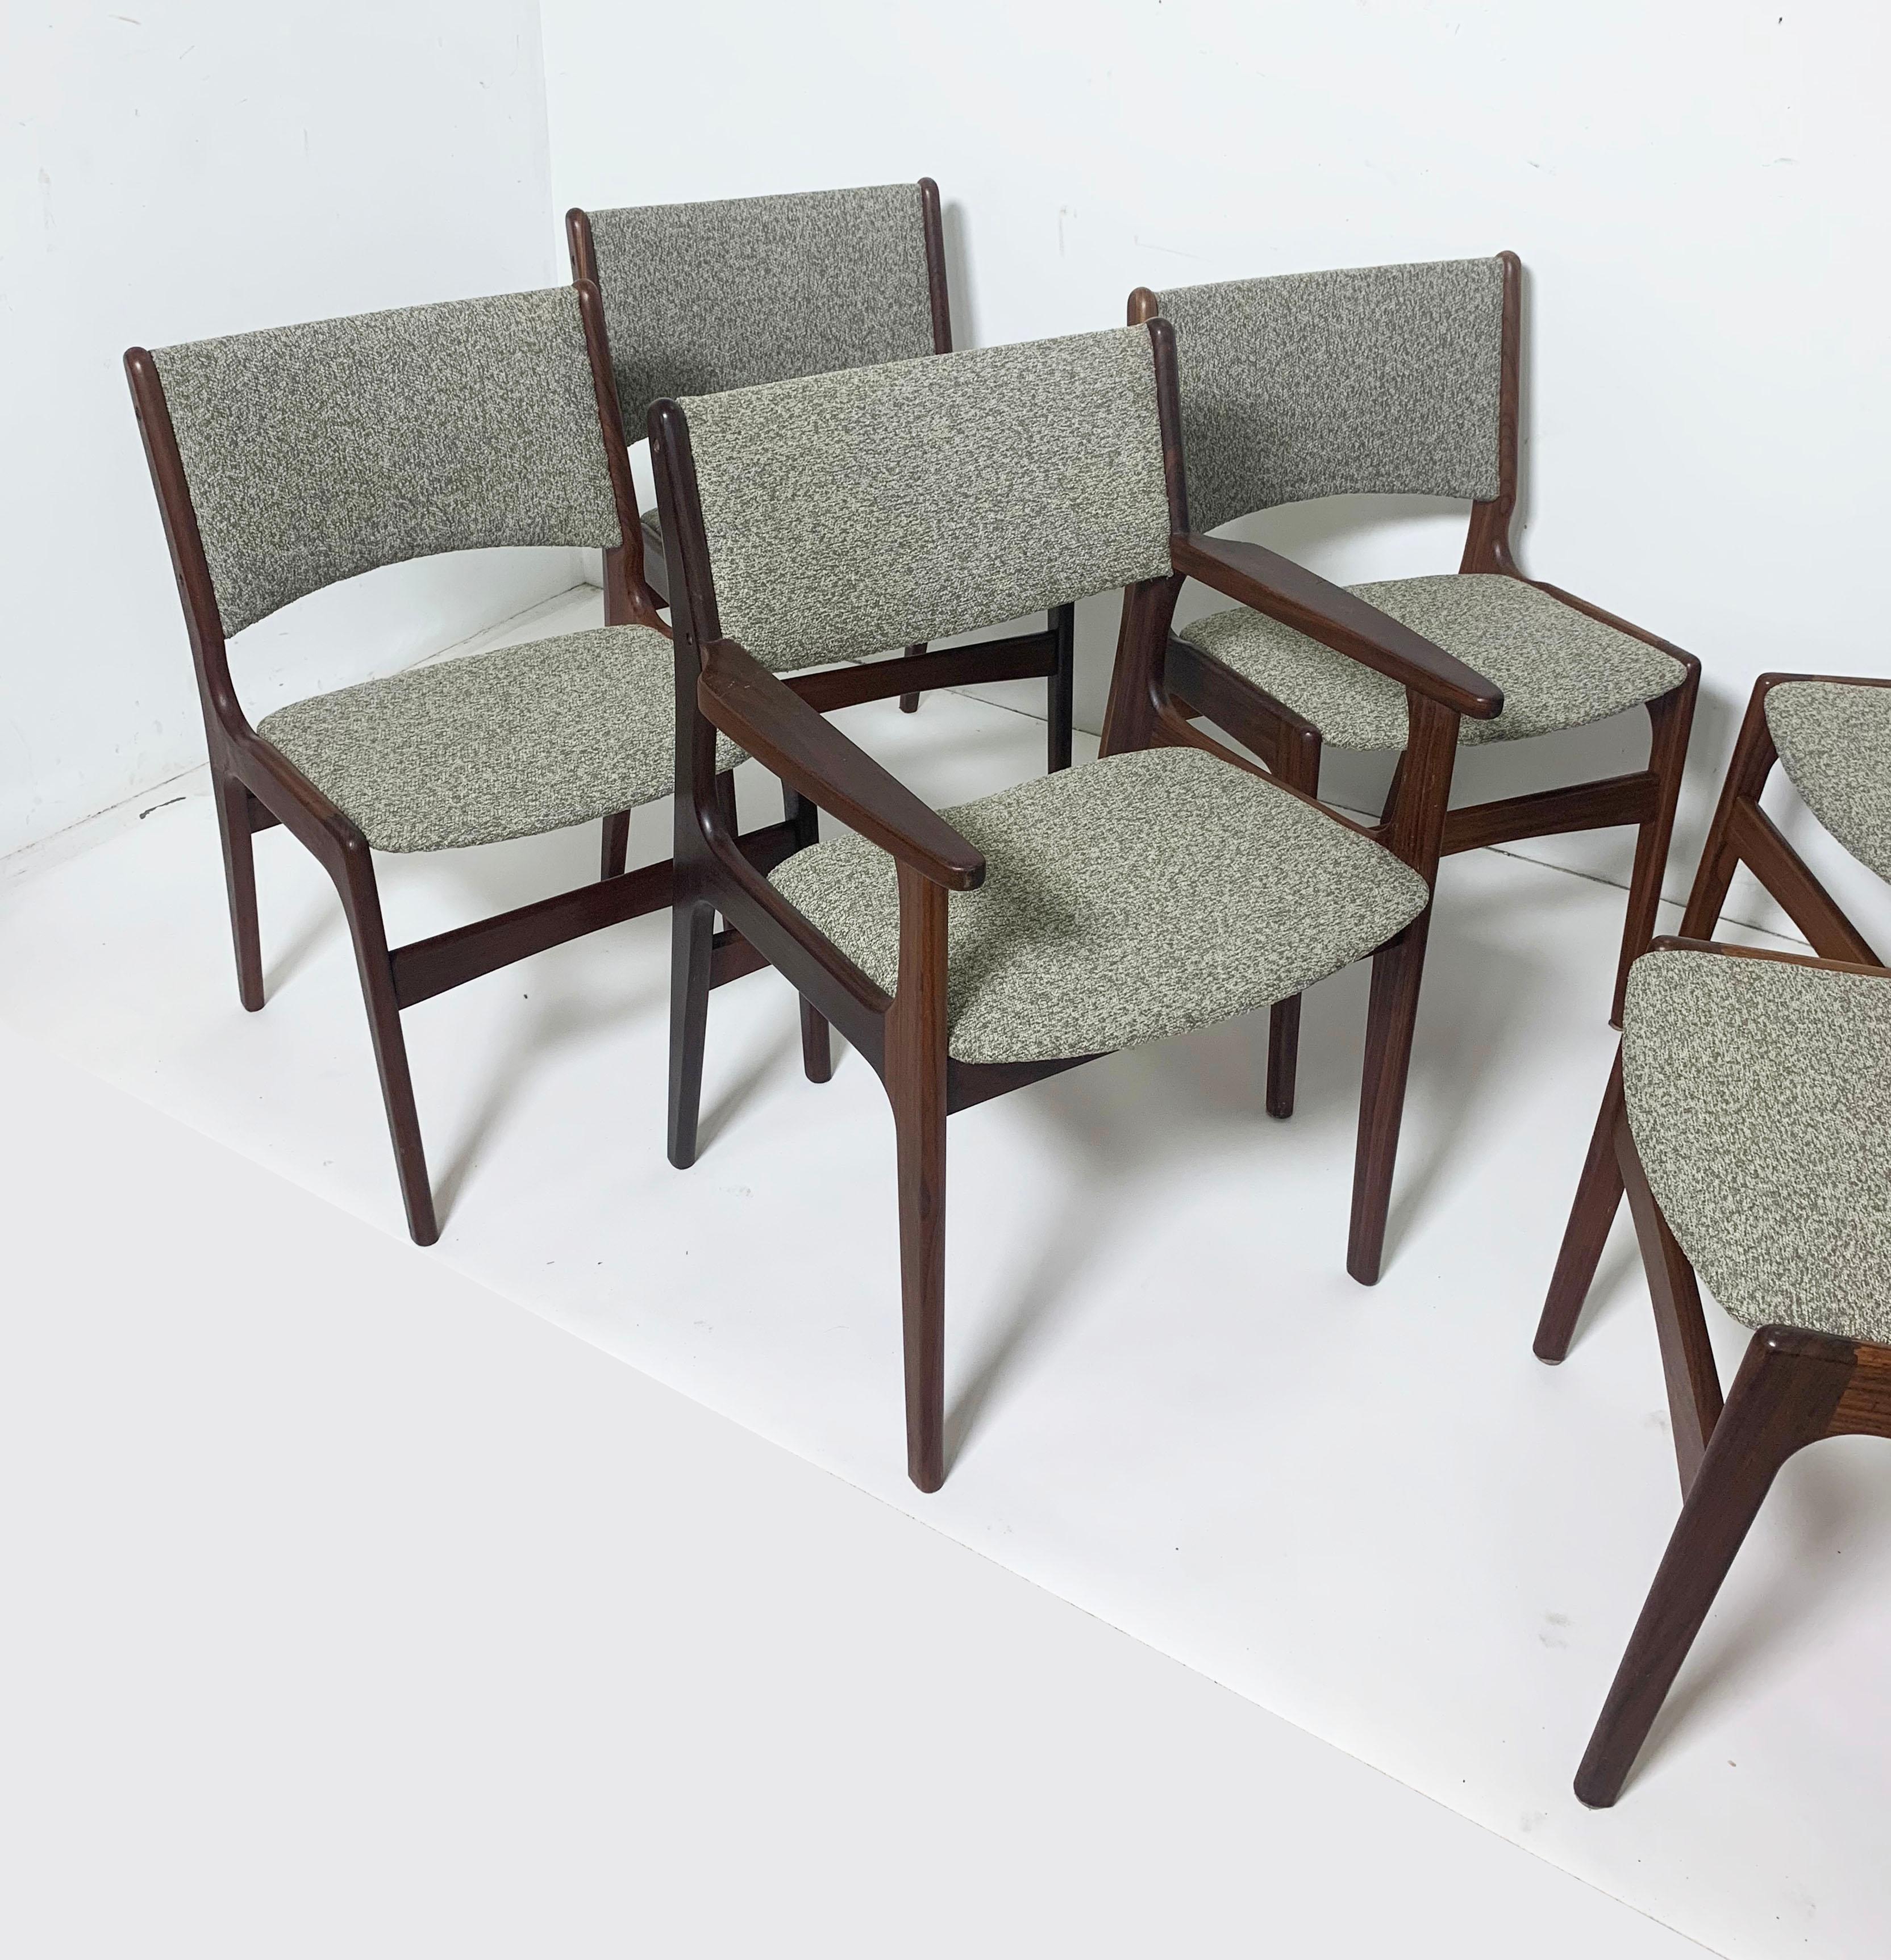 Set of eight Danish teak dining chairs by Erik Buch, circa 1960s. This newly upholstered set in teak consists of 7 sides and one arm.

Arm chair measures: 23.25